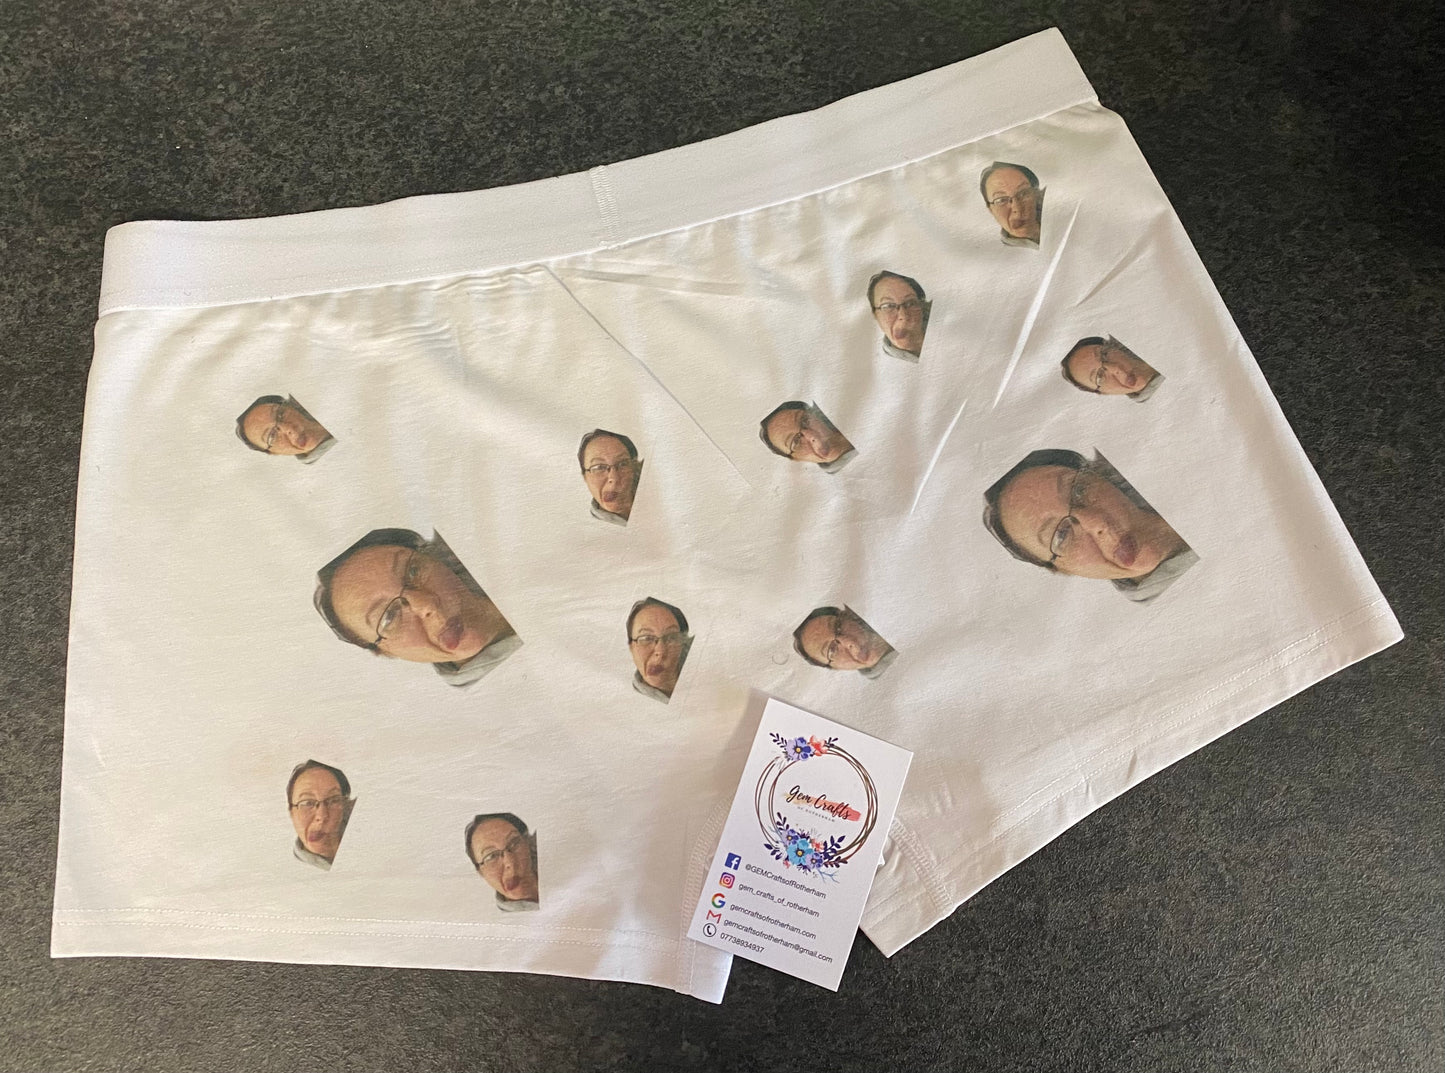 Personalised Boxer Shorts! Your Face on Boxers!